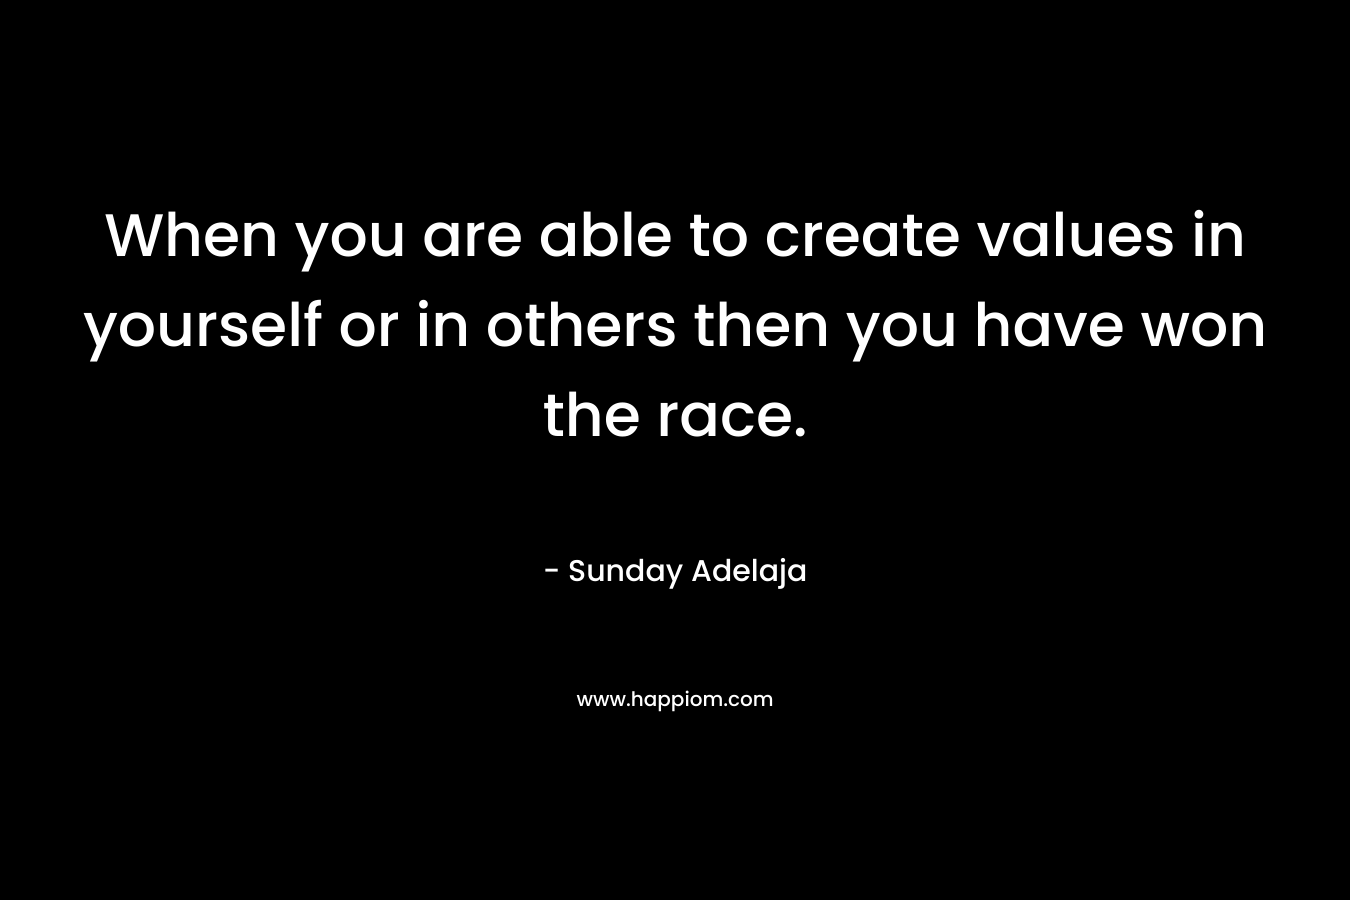 When you are able to create values in yourself or in others then you have won the race.